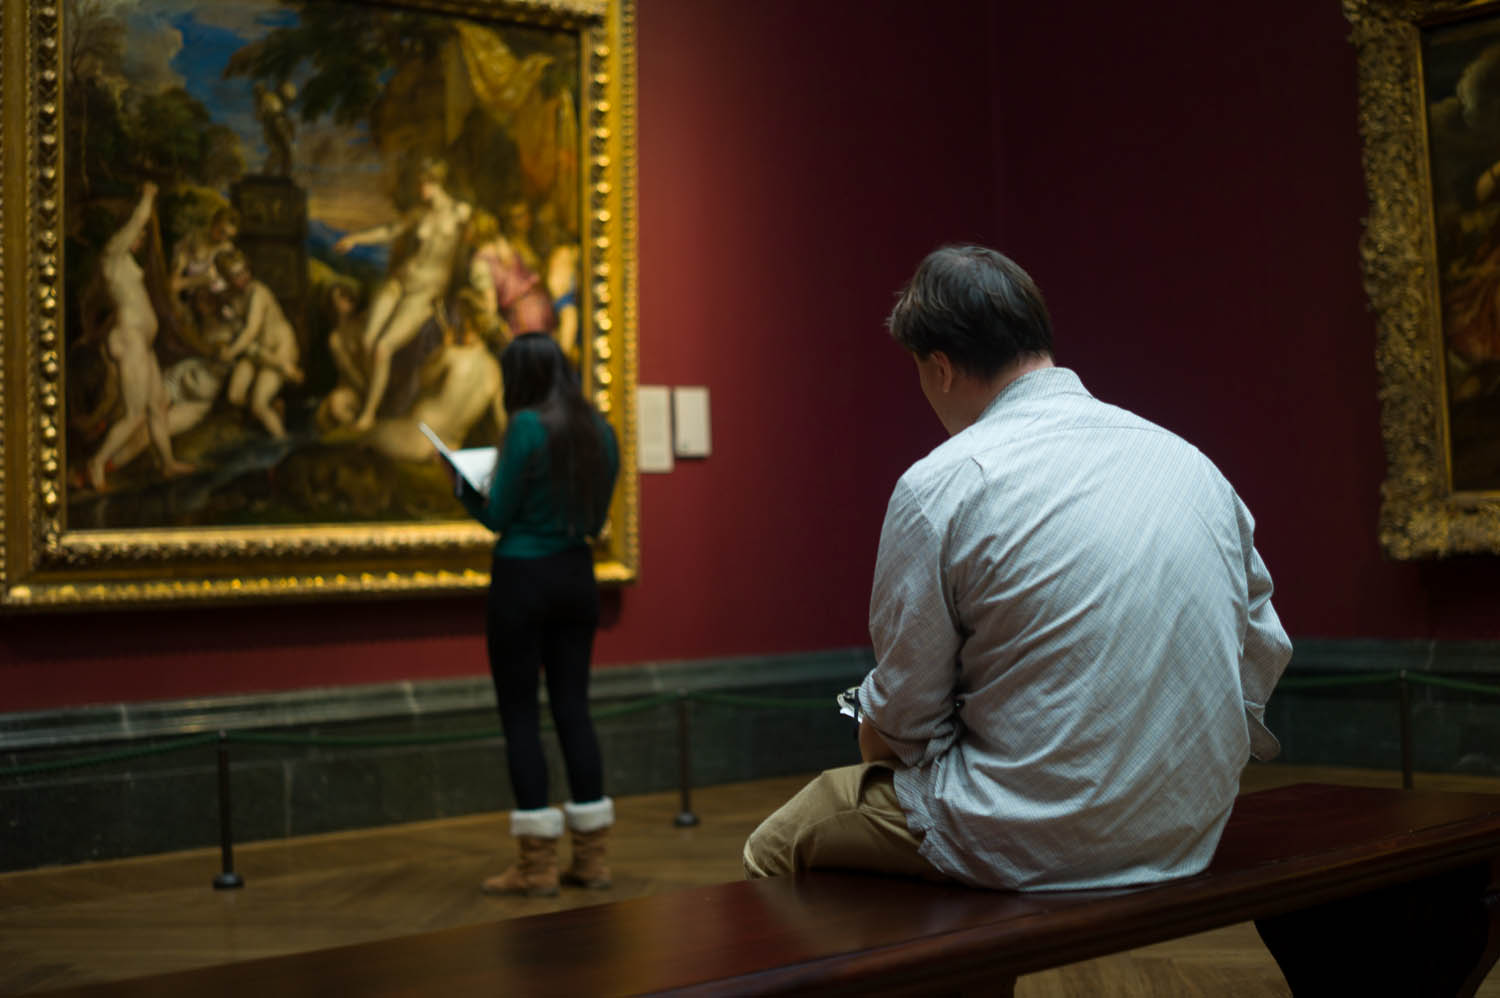 Some artists sketch the painting in front of them at the museum